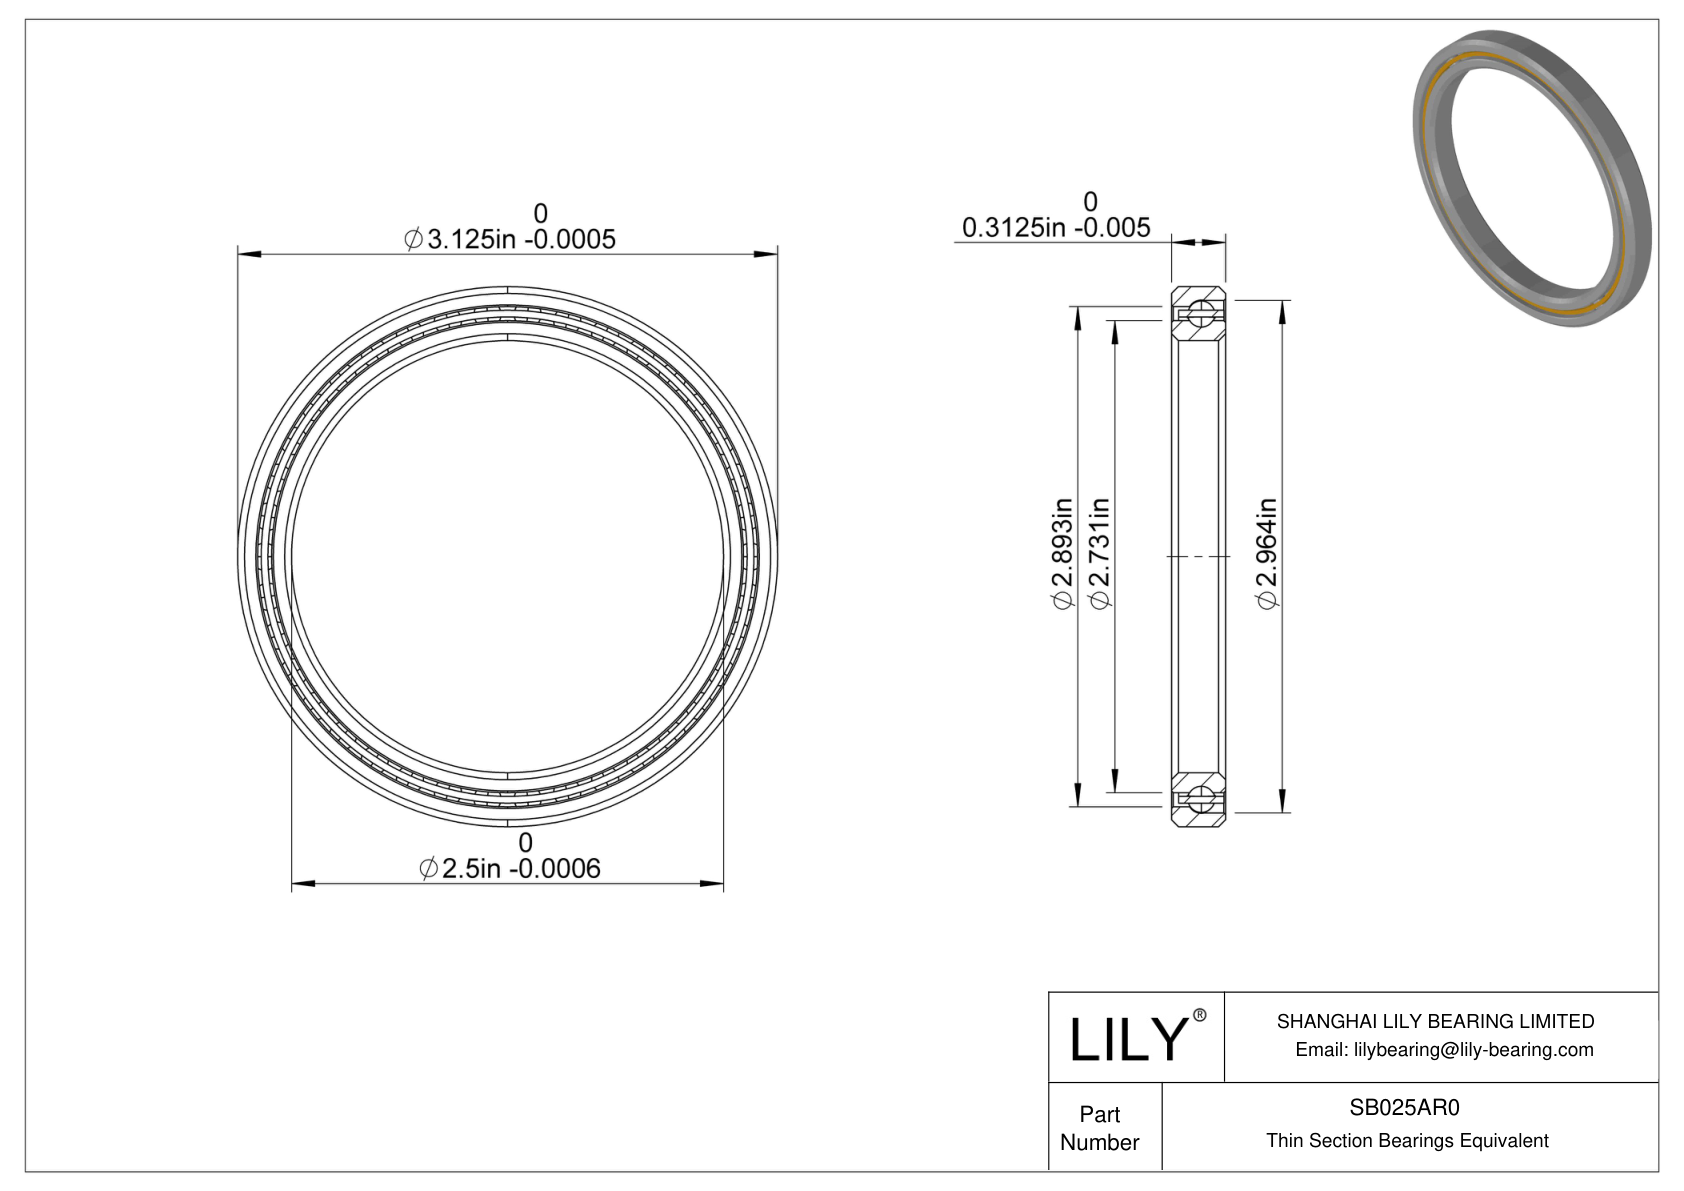 SB025AR0 Constant Section (CS) Bearings cad drawing